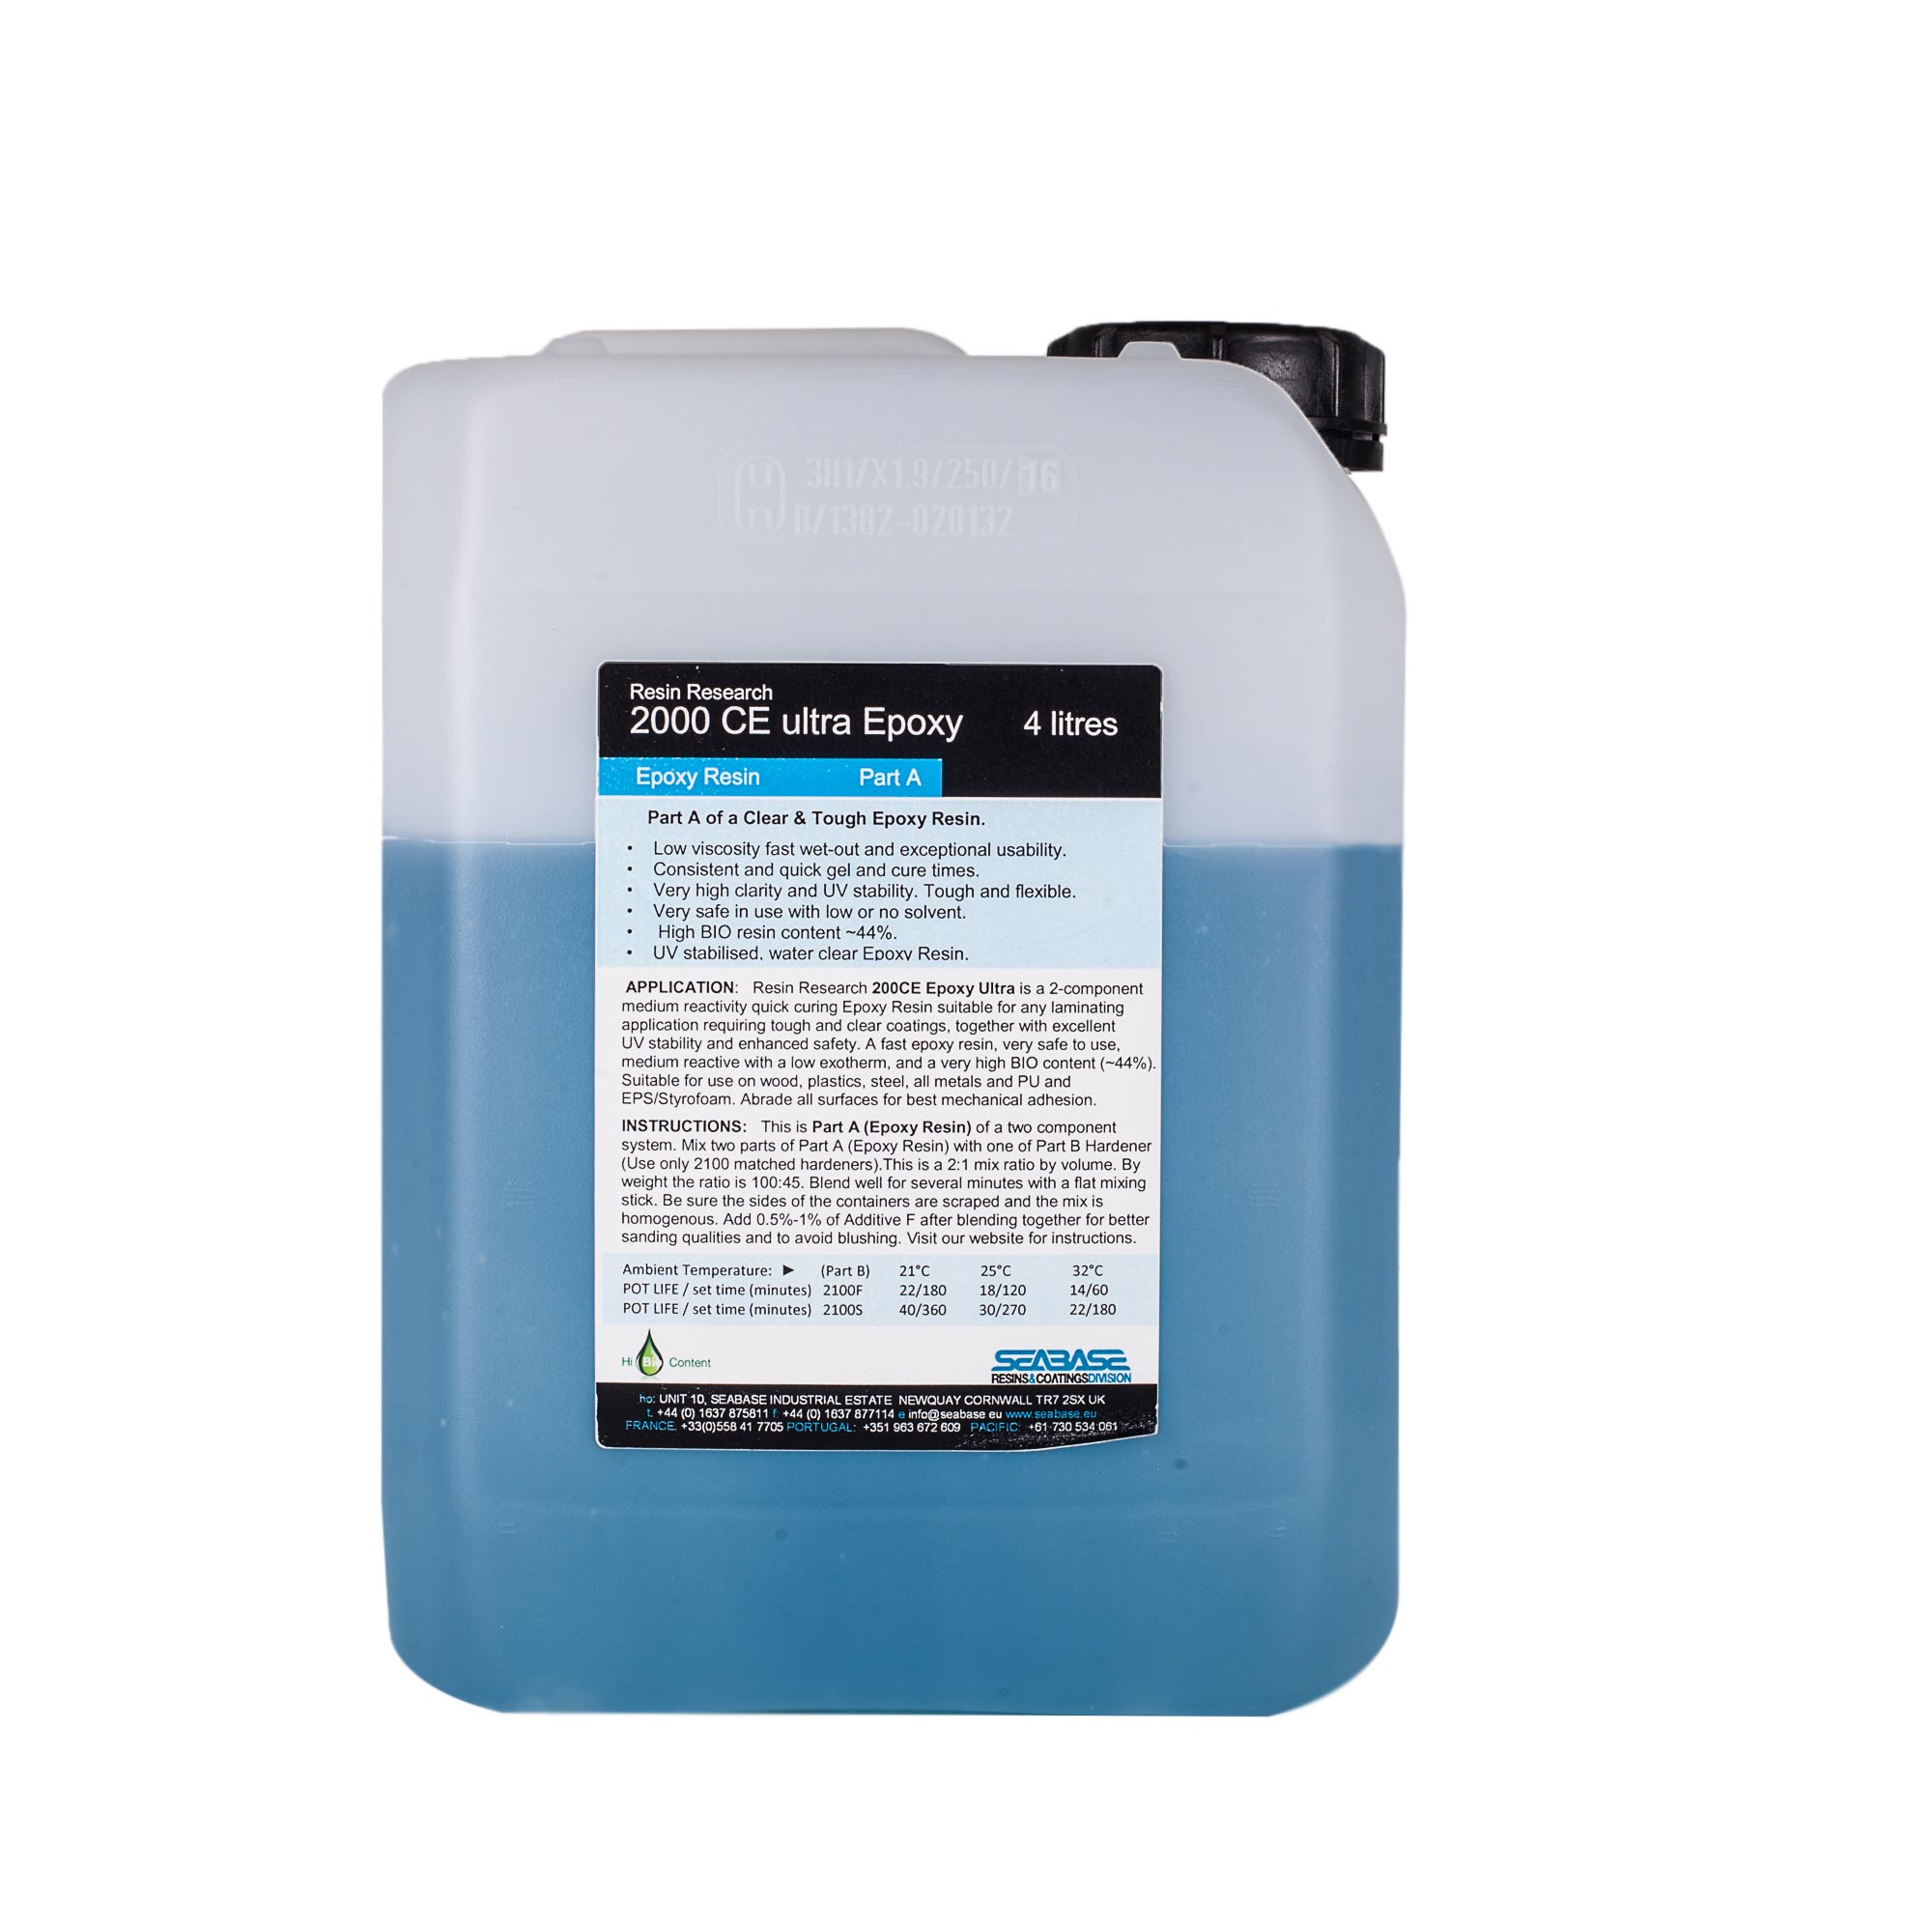 Resin Research 1.5 Gallon Kit 2000CE Epoxy with Fast Hardener